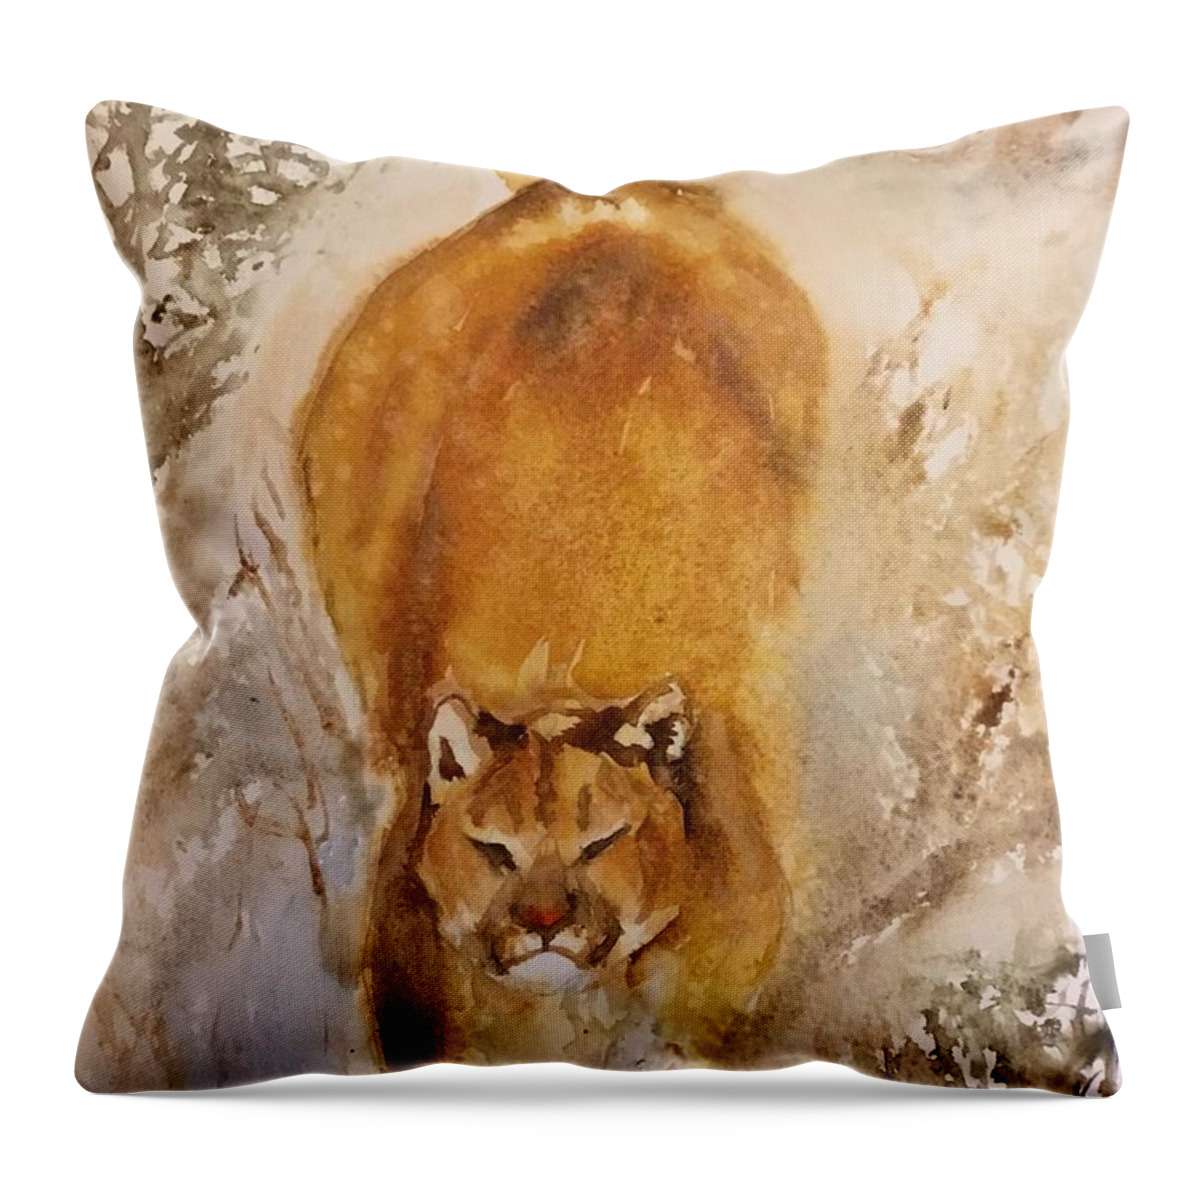 #66 2019 Throw Pillow featuring the painting #66 2019 by Han in Huang wong